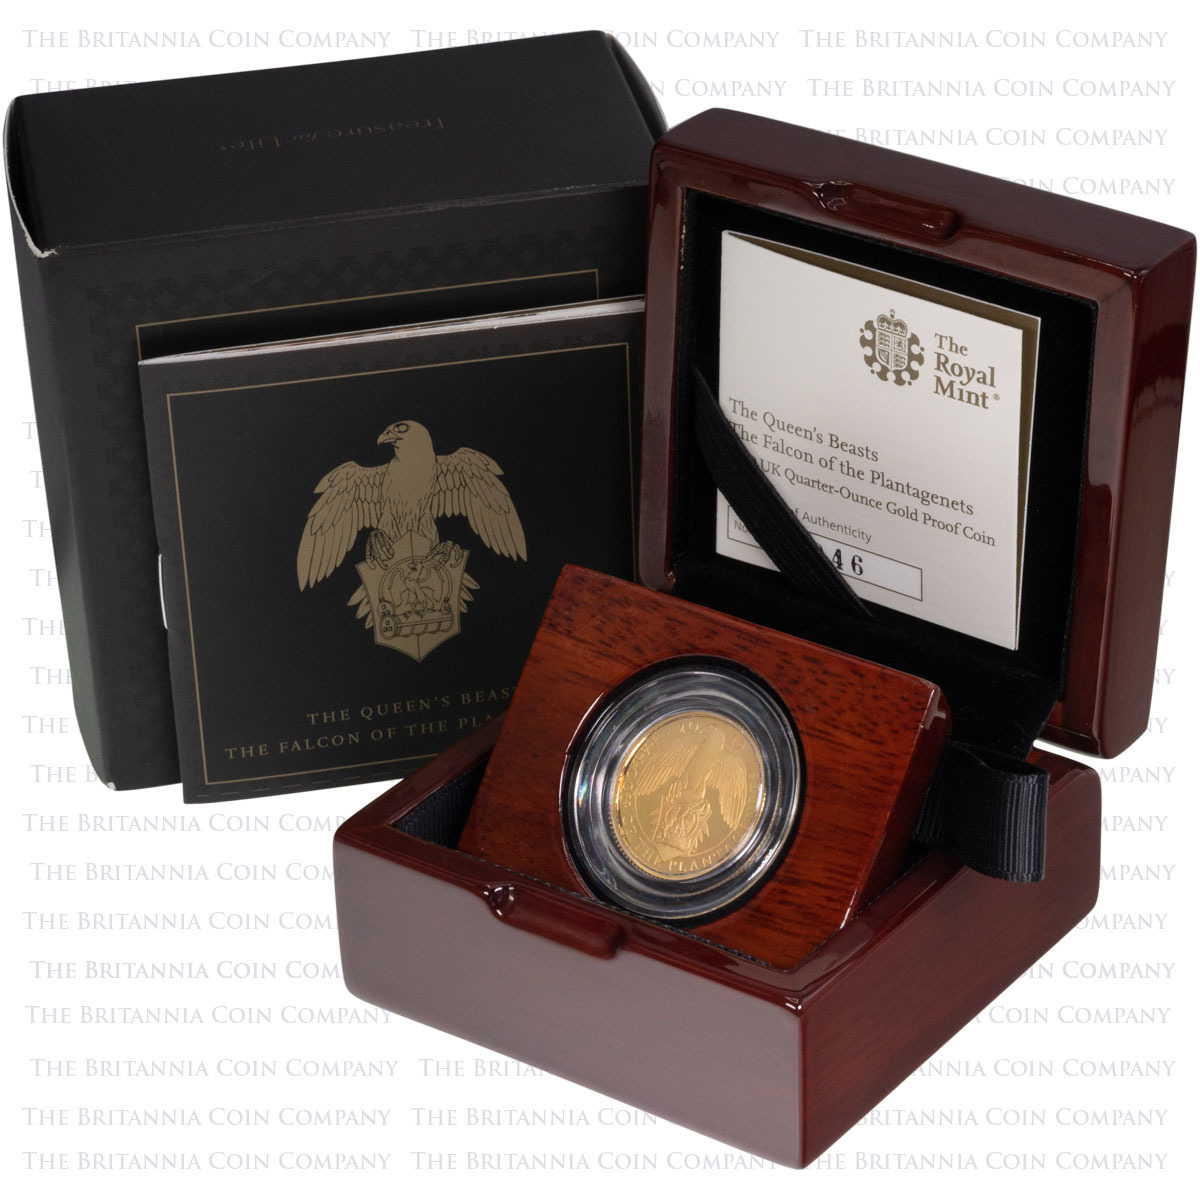 UK19QFQO 2019 Queen's Beasts Falcon Of The Plantagenets Quarter Ounce Gold Proof Coin Boxed